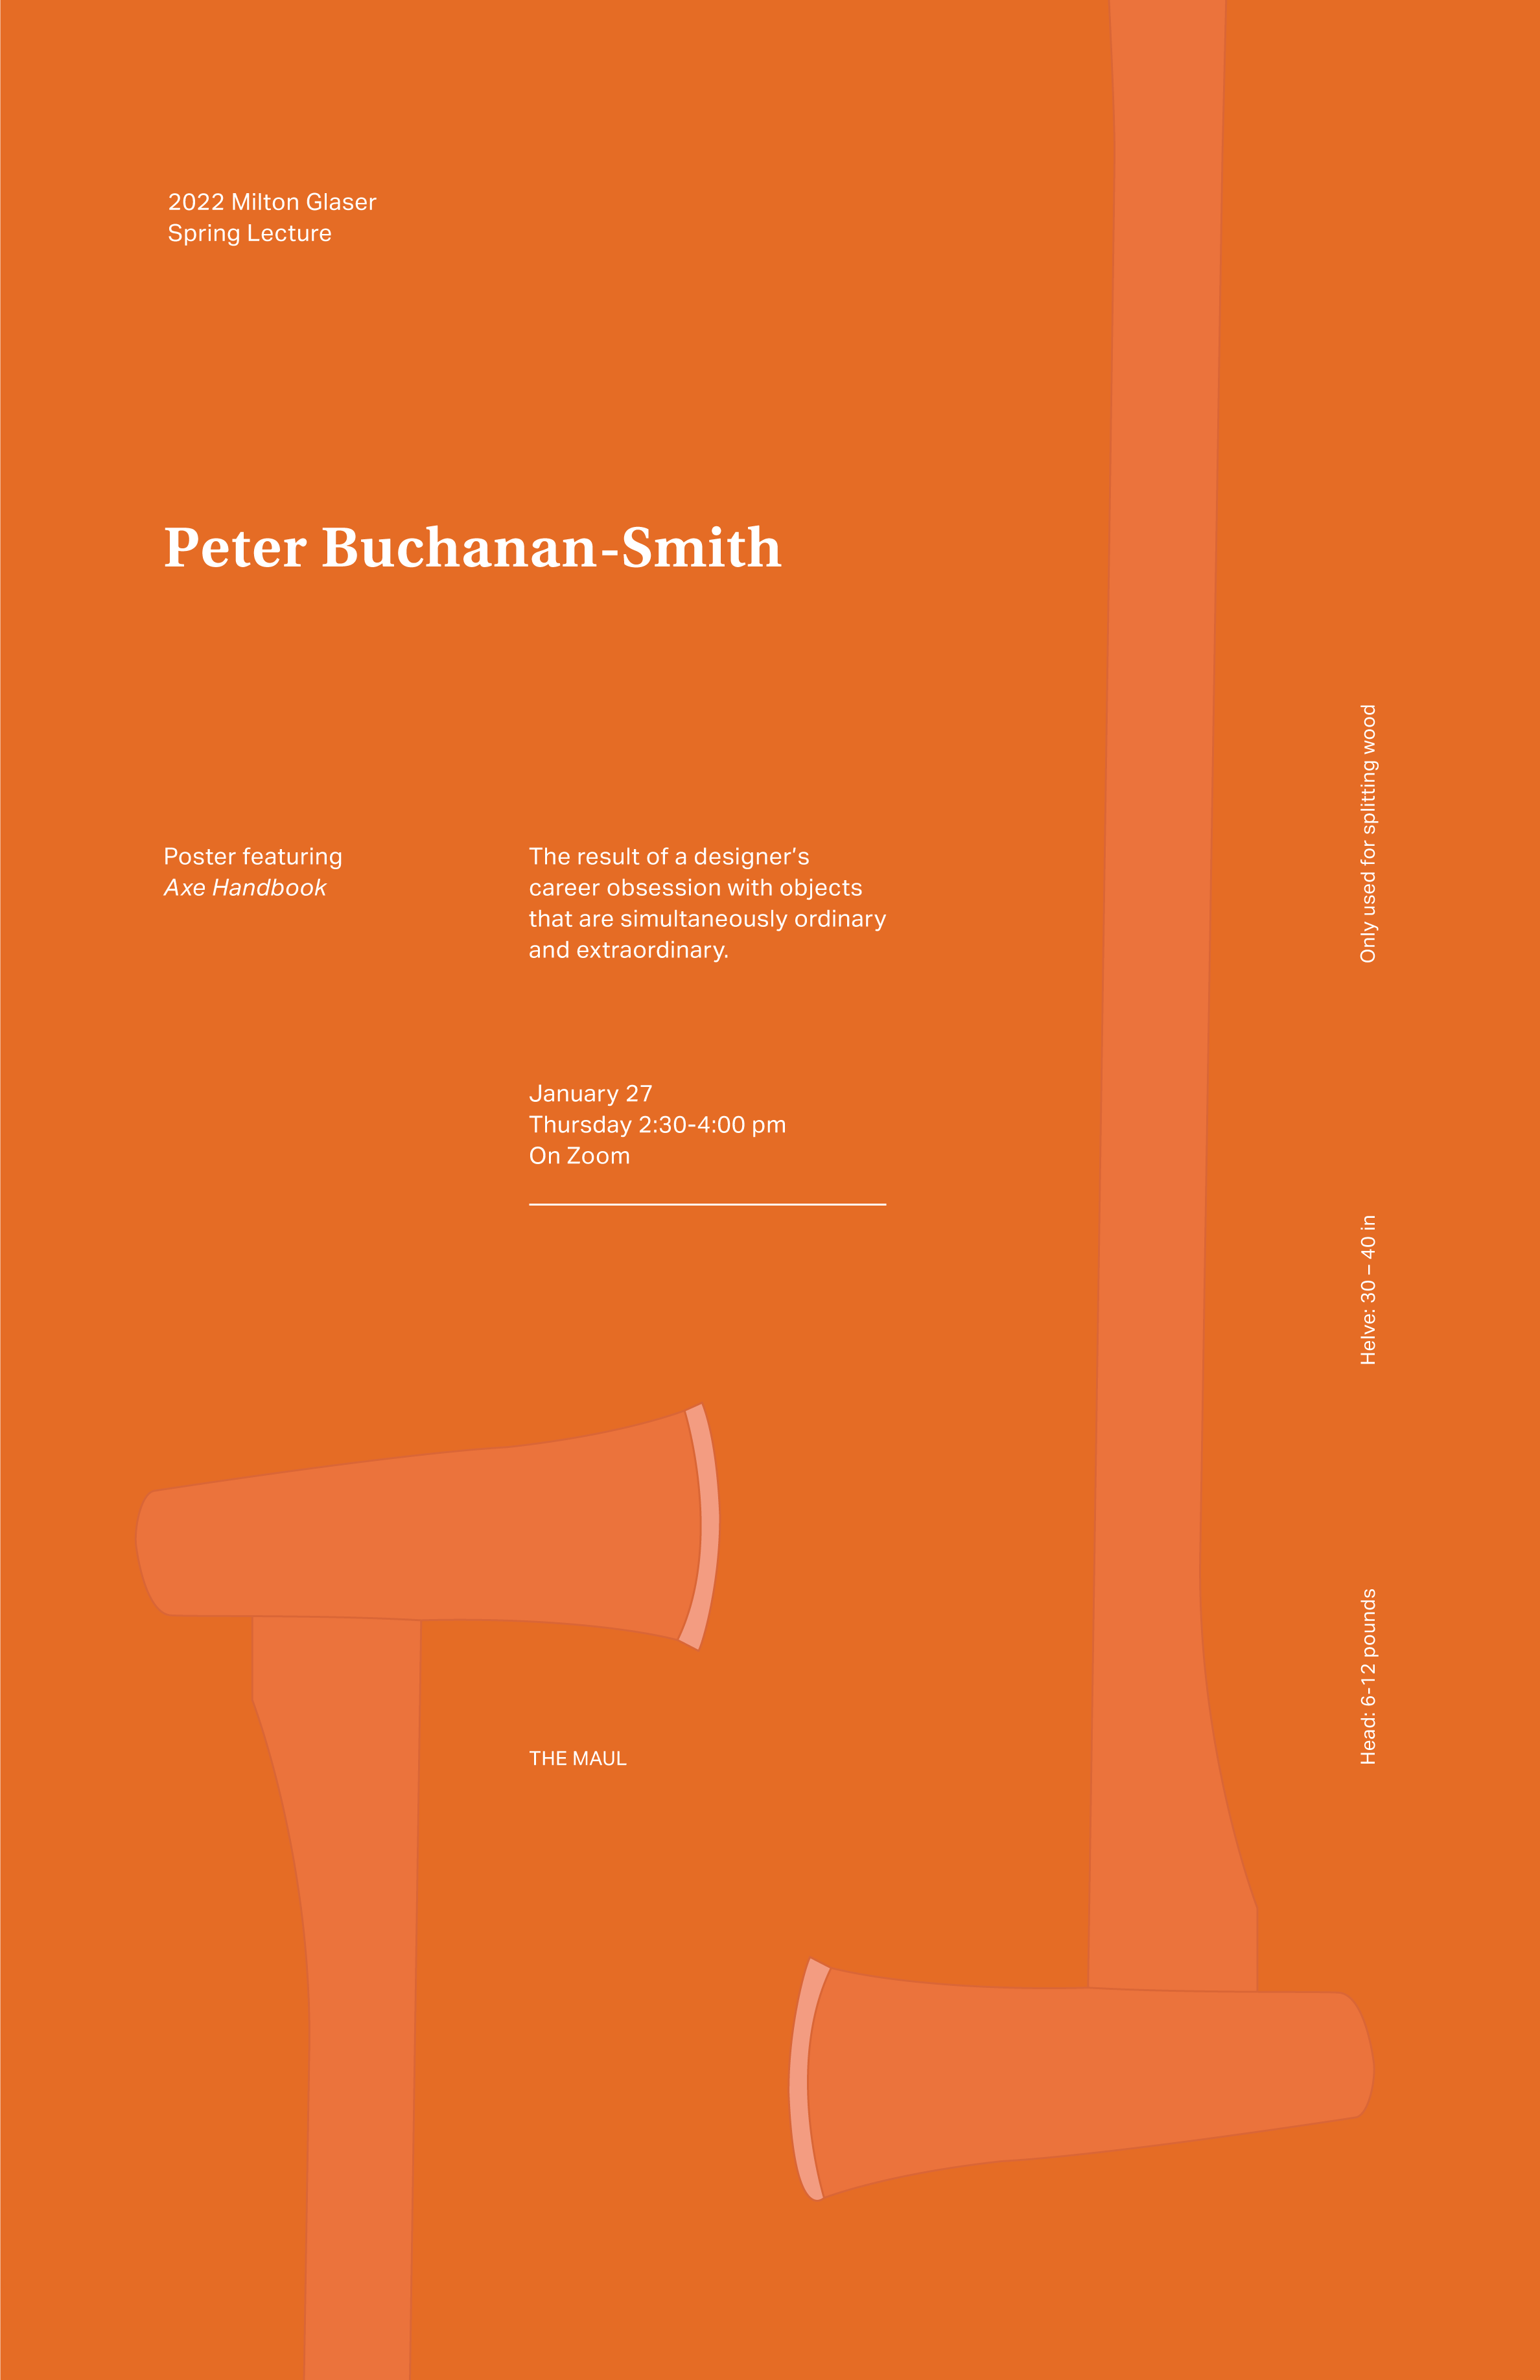 Vertical poster of 2022 Milton Glaser Guest Lecture Series with Peter Buchanan-Smith, January 27, from 2:30pm to 4pm on zoom. White text orange background with illustrations of axes